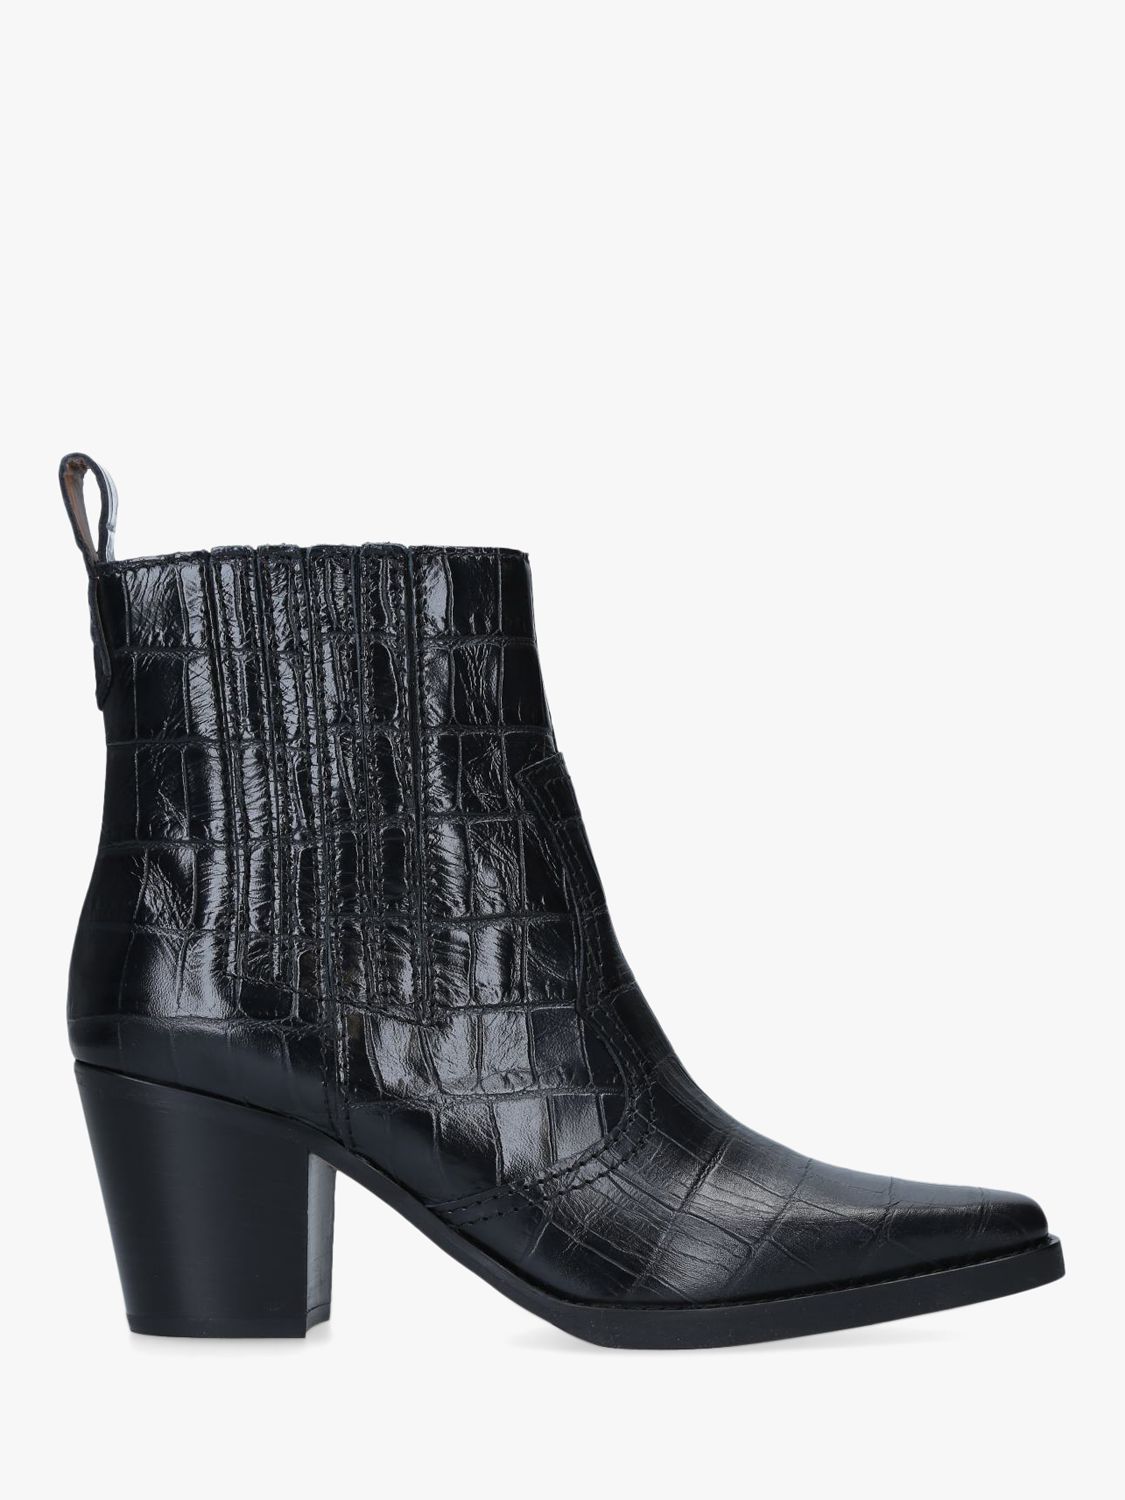 GANNI Callie Croc Effect Leather Ankle Boots at John Lewis & Partners